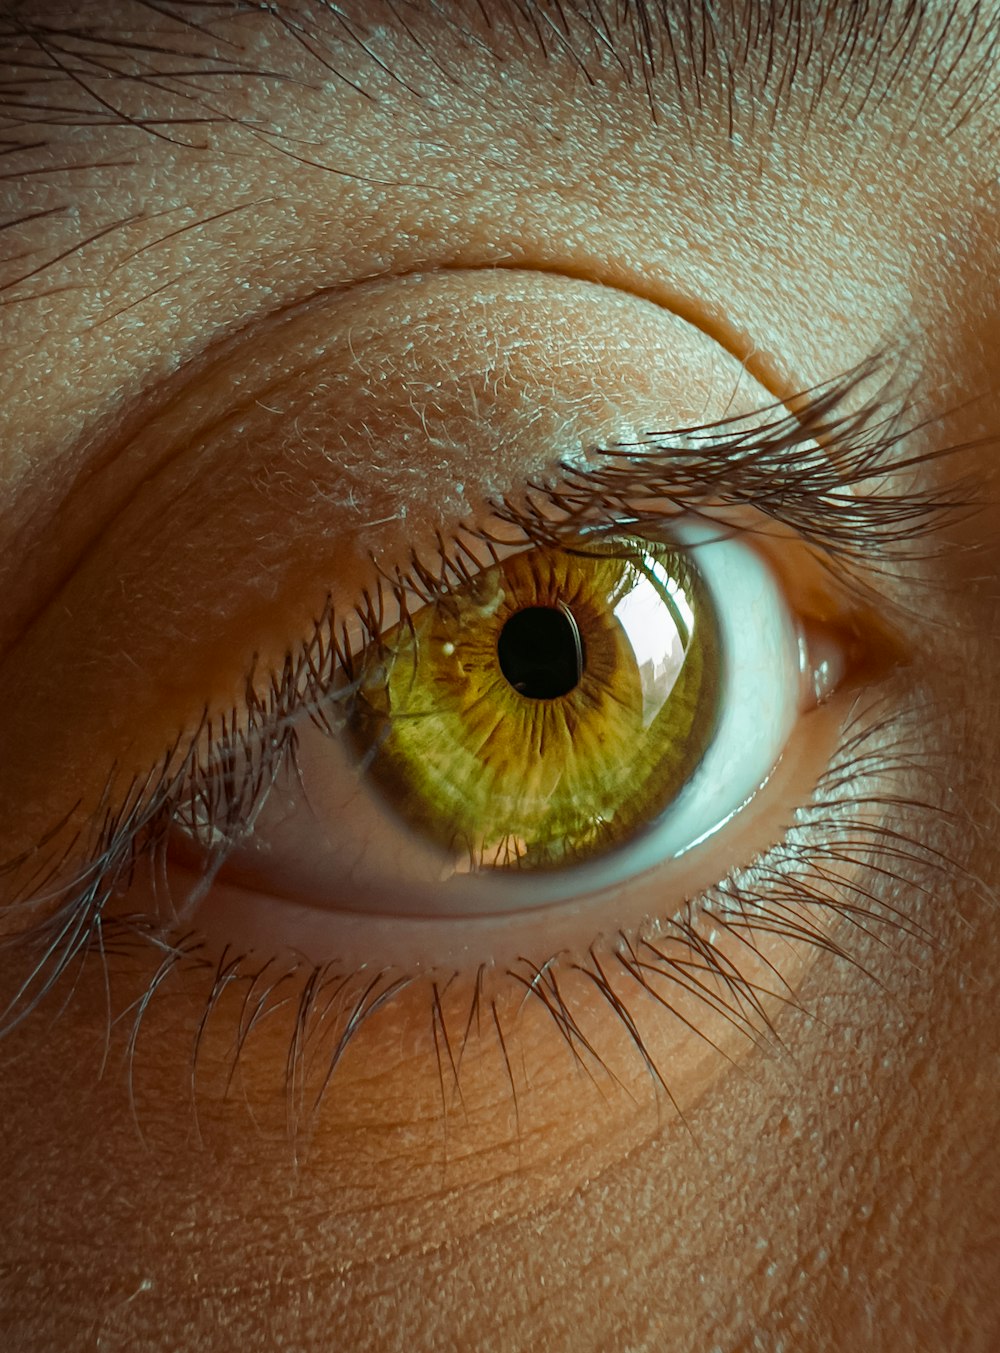 a close up of a person's eye with a yellow iris